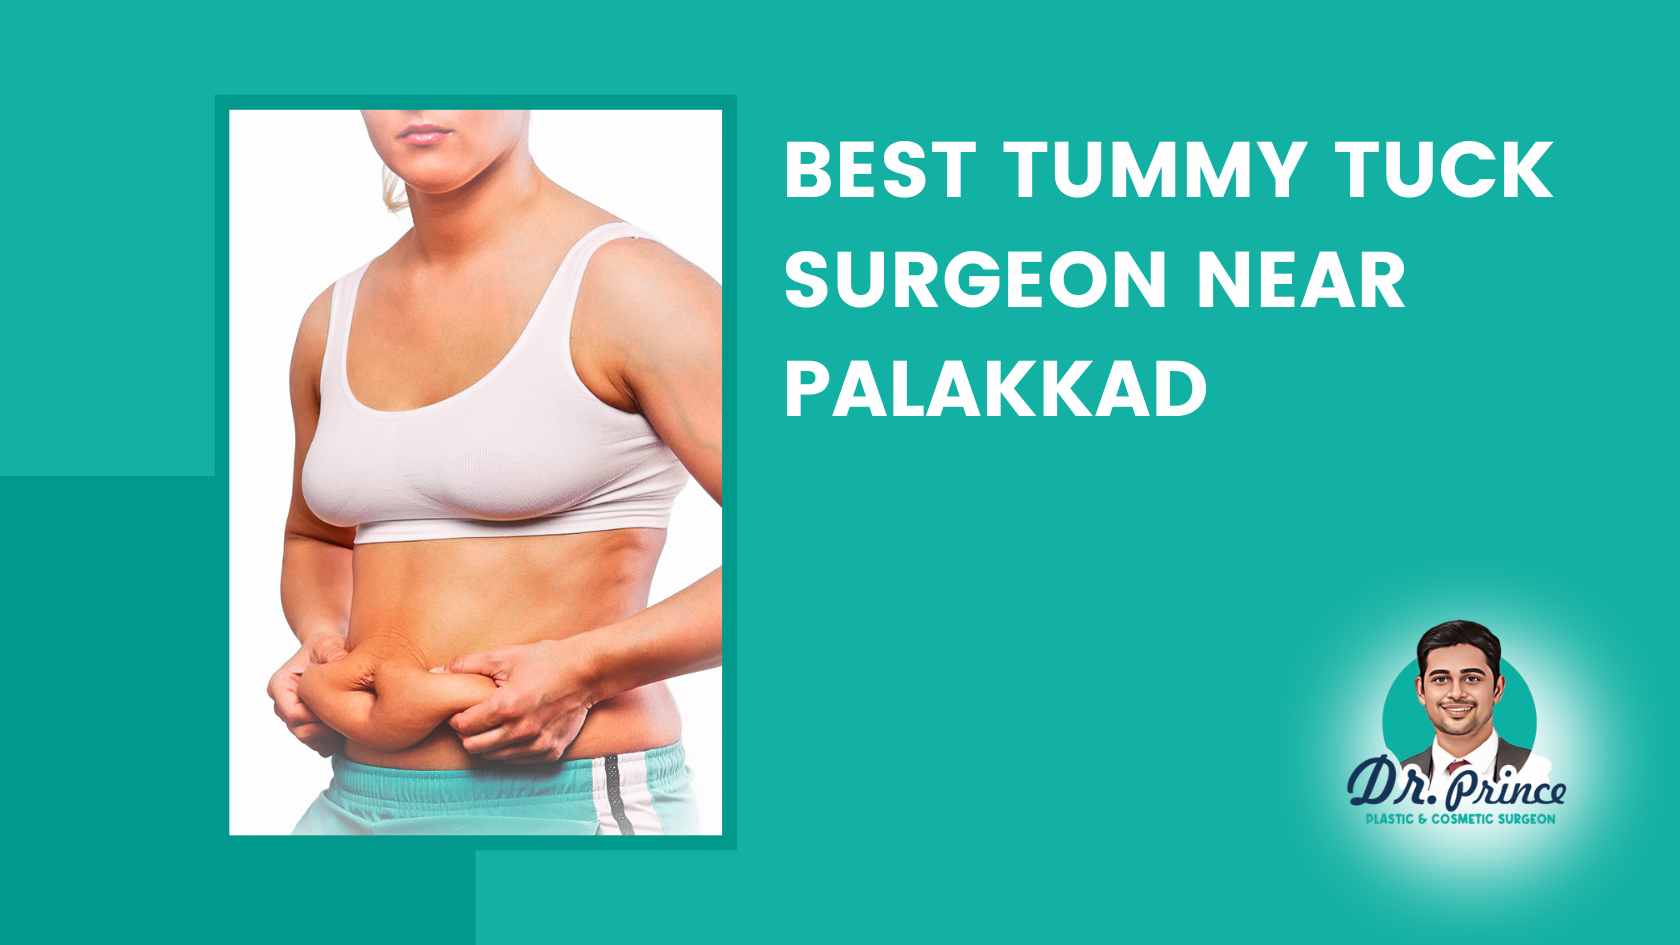 Dr. Prince performing a tummy tuck surgery in his Palakkad clinic.